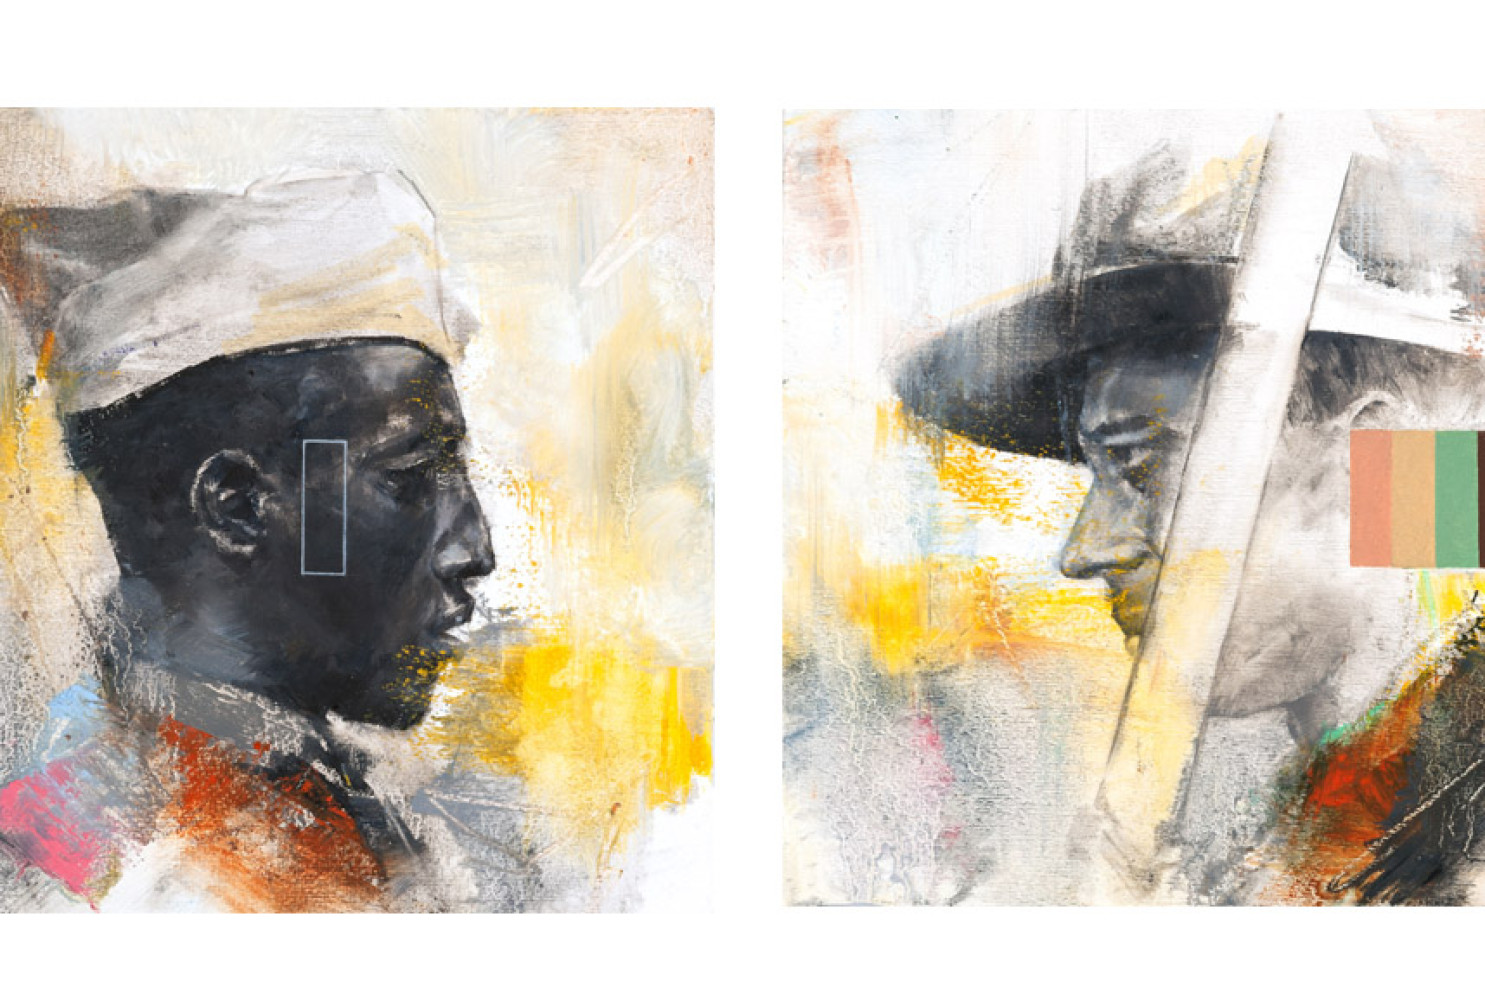 Side A + B, 2017, By Charles Edward Williams (American, b. 1984); 8 x 9 inches (framed diptych); Oil and gesso on watercolor paper; Courtesy of the Morris Museum of Art, Augusta, Georgia